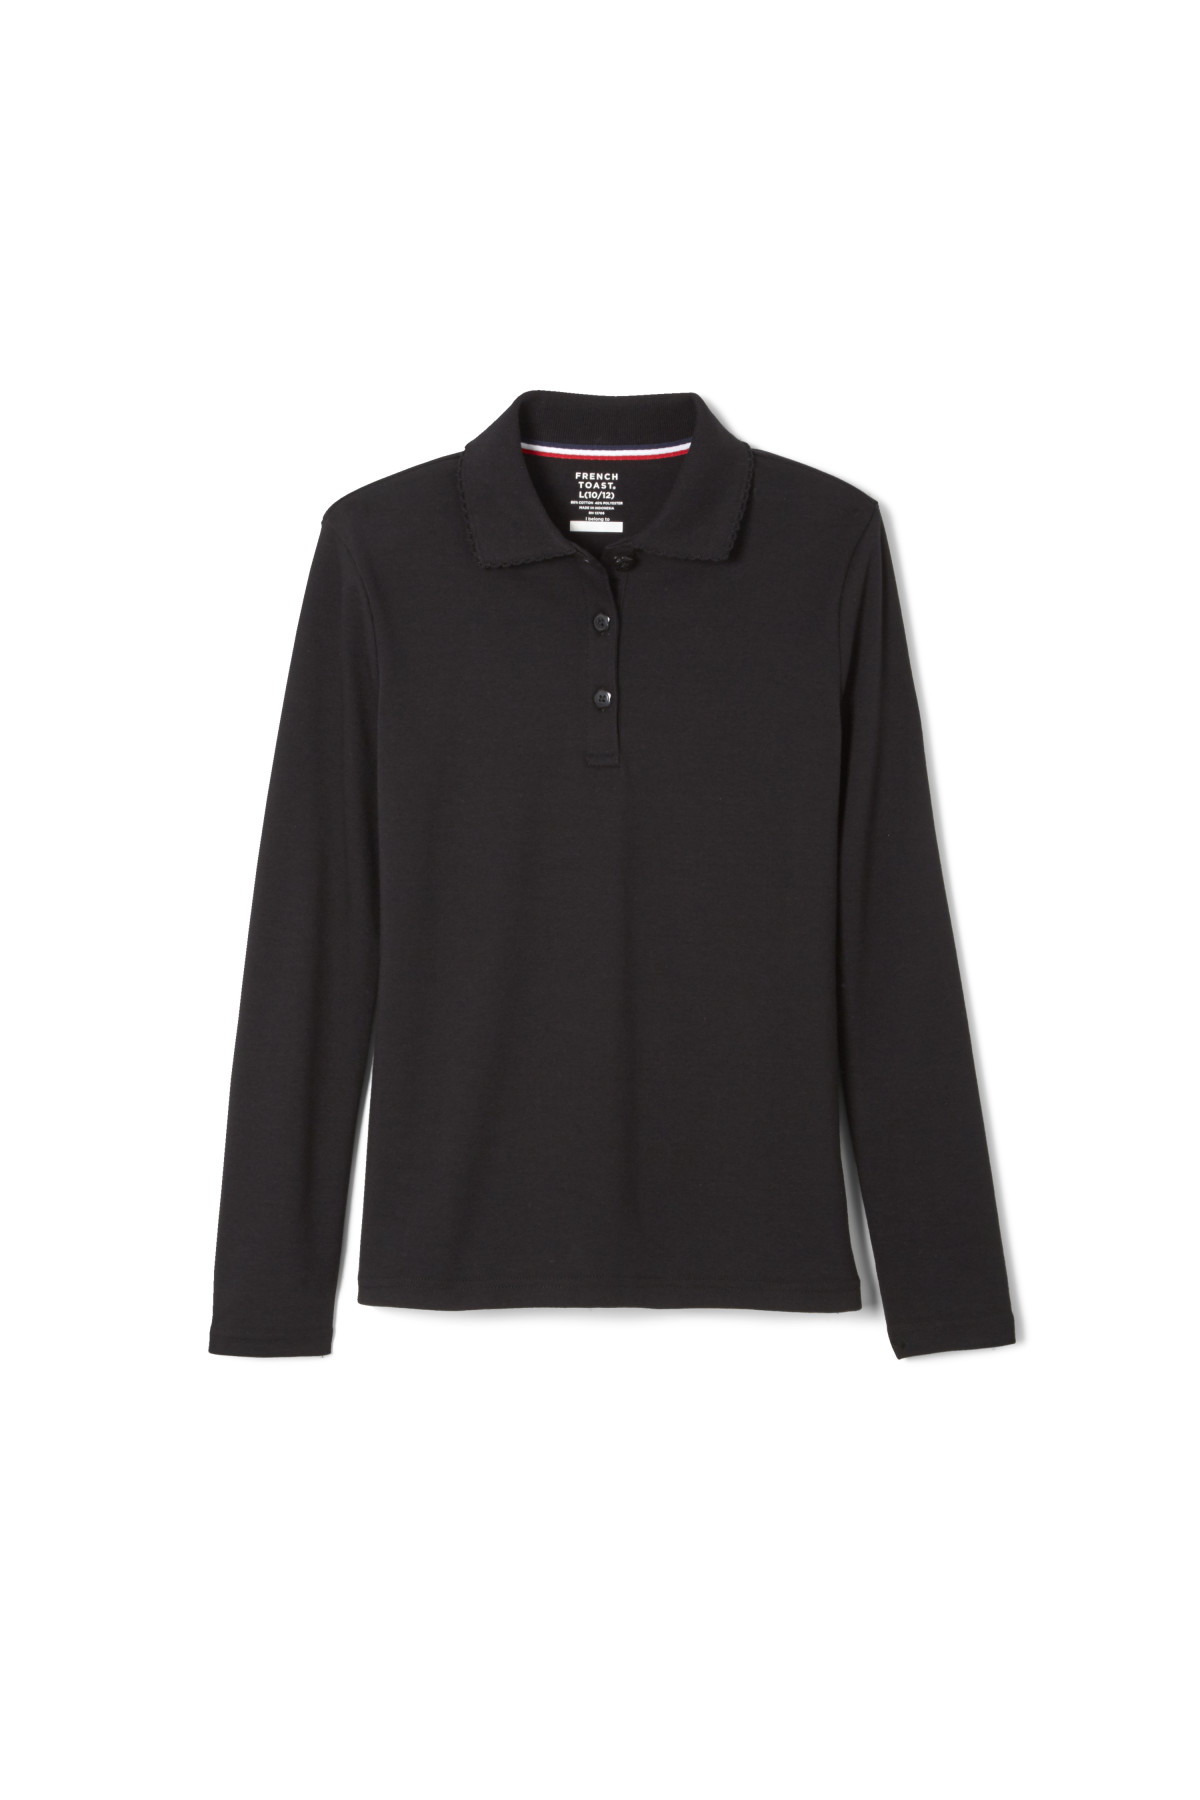 French Toast Girls' Long Sleeve Interlock Polo with Picot Collar 